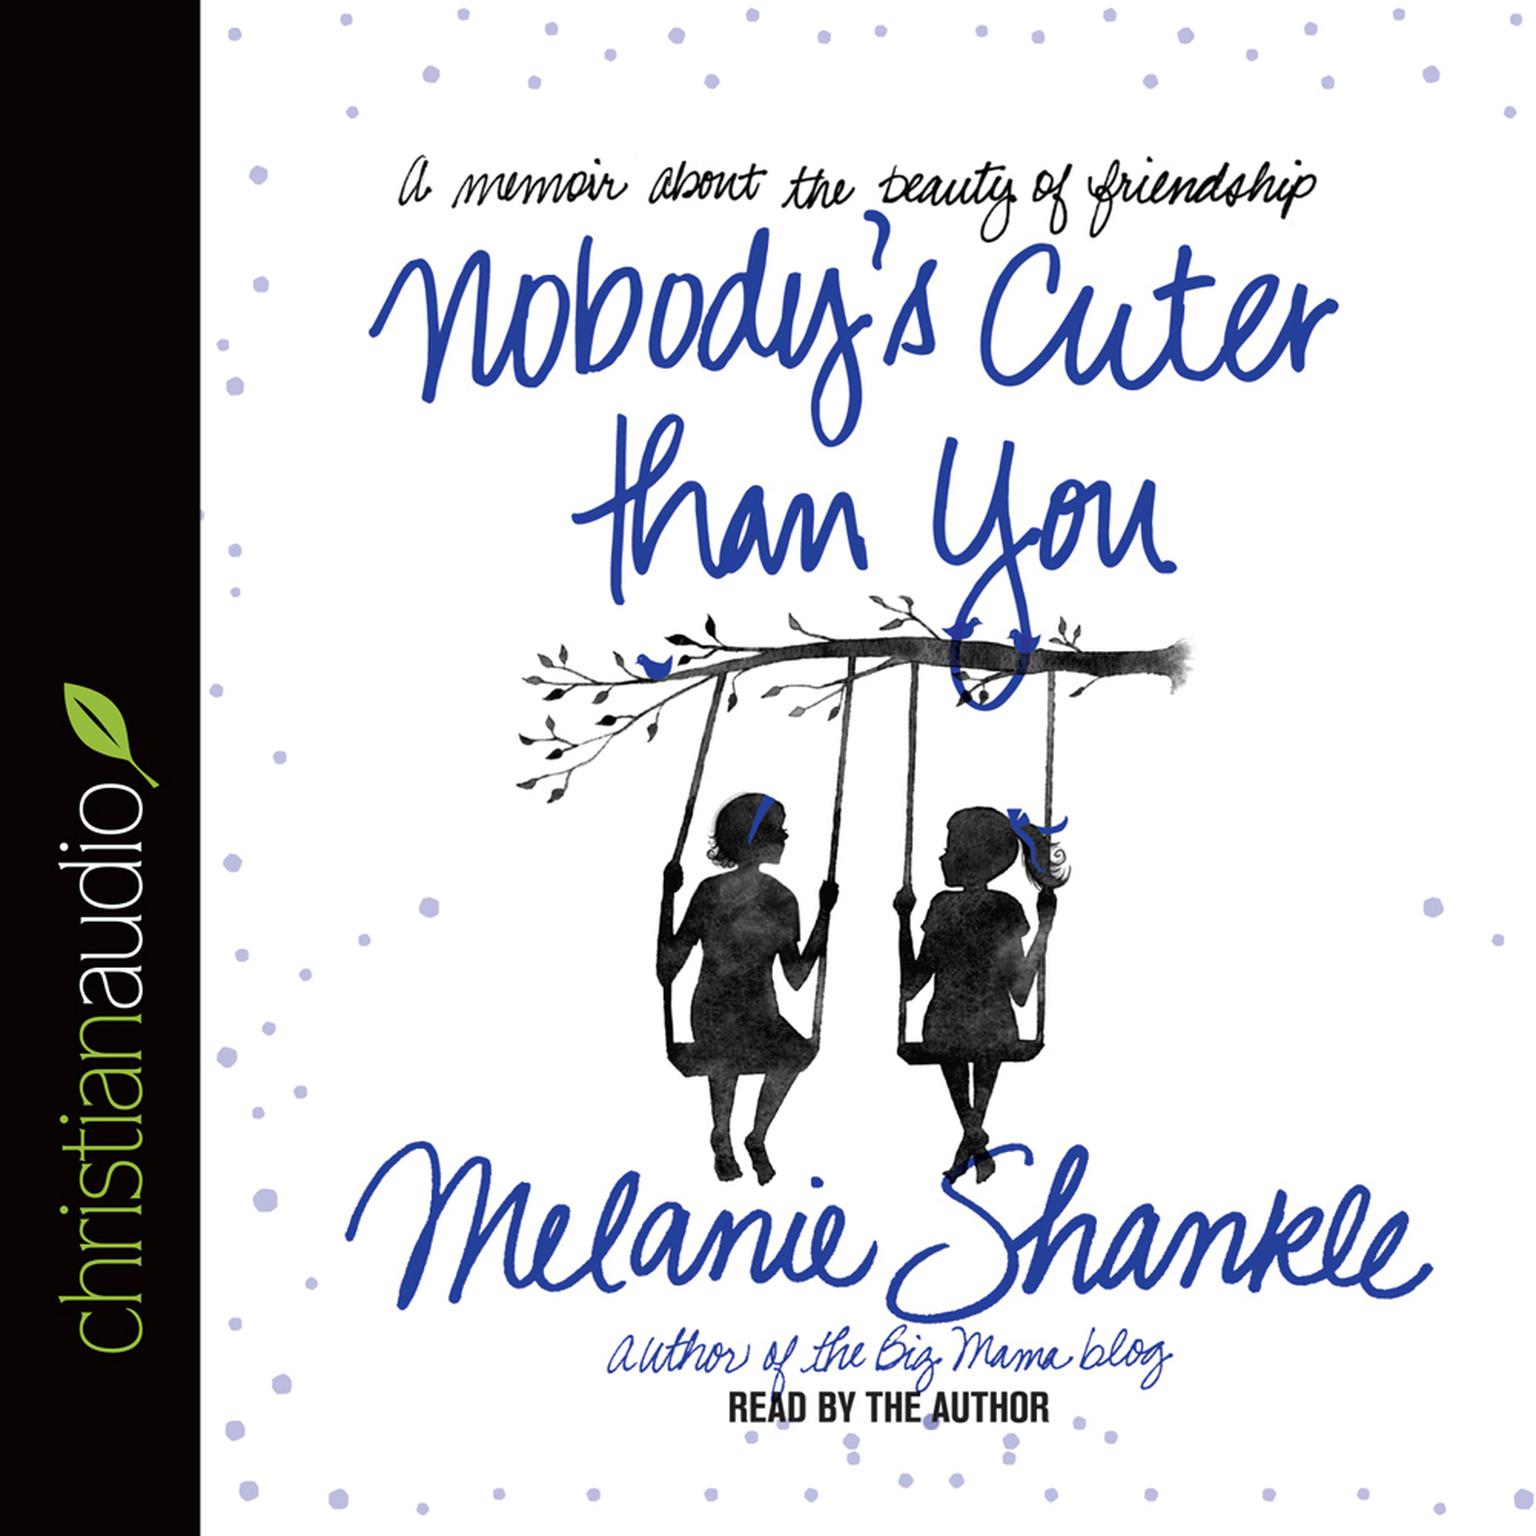 Nobodys Cuter than You: A Memoir about the Beauty of Friendship Audiobook, by Melanie Shankle